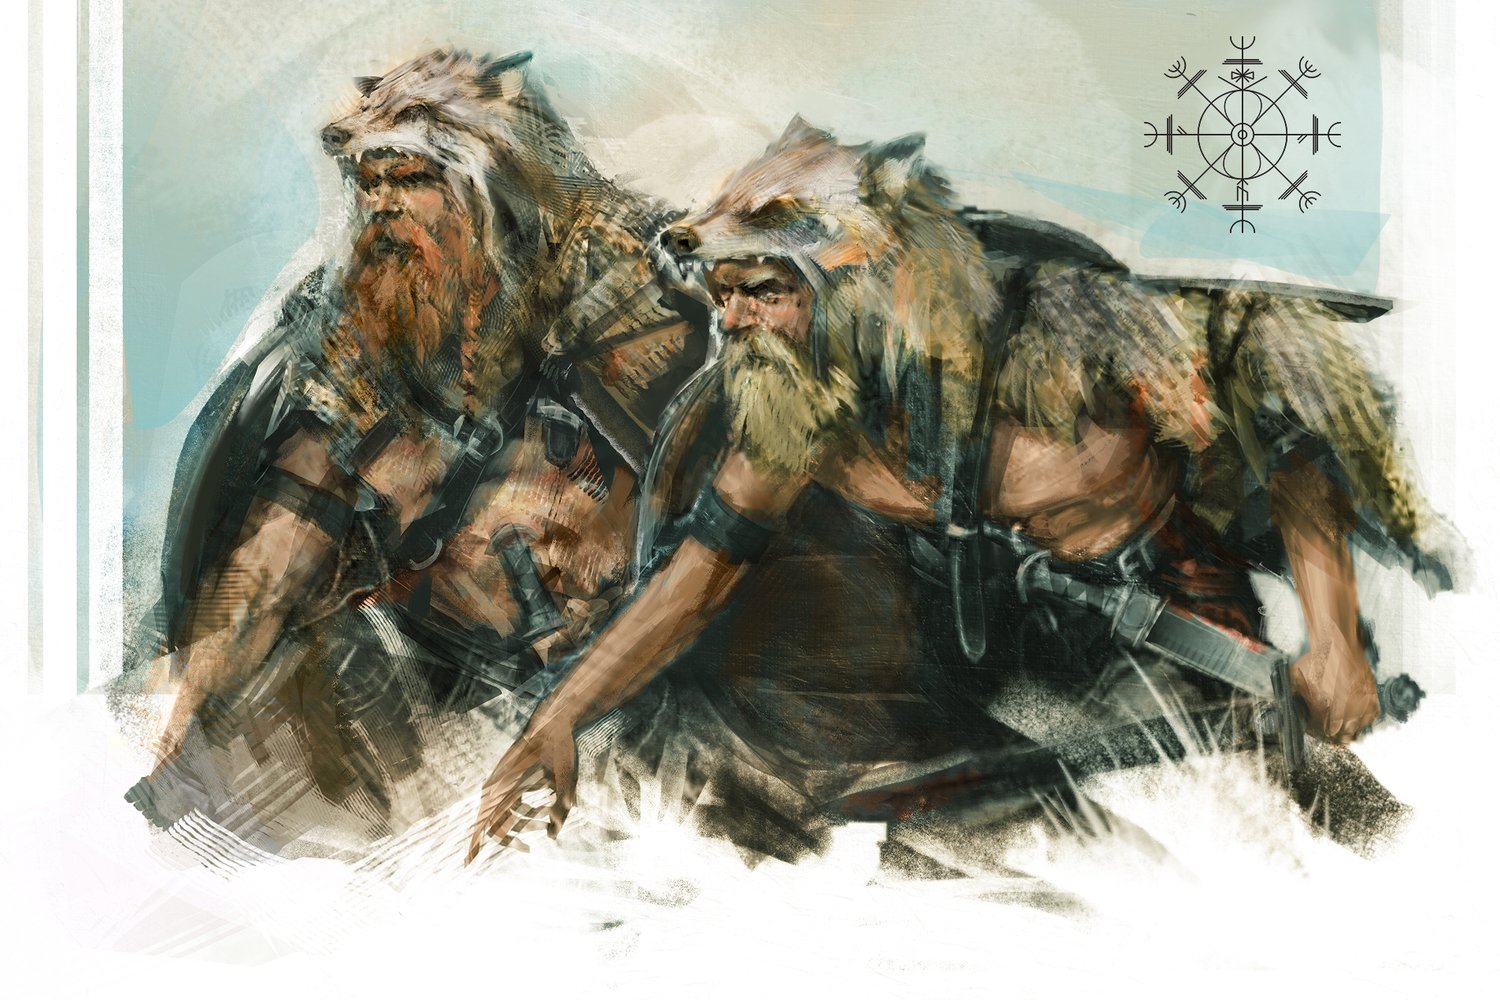 A digital illustration of two Viking warriors with wolf skins and fur. The two men are wearing armor and carrying weapons, and appear to be sneaking up on some one. The background is a snowy landscape with a blue sky and a compass-like symbol in the top right corner. The illustration has a painterly style with loose brushstrokes and a muted color palette.